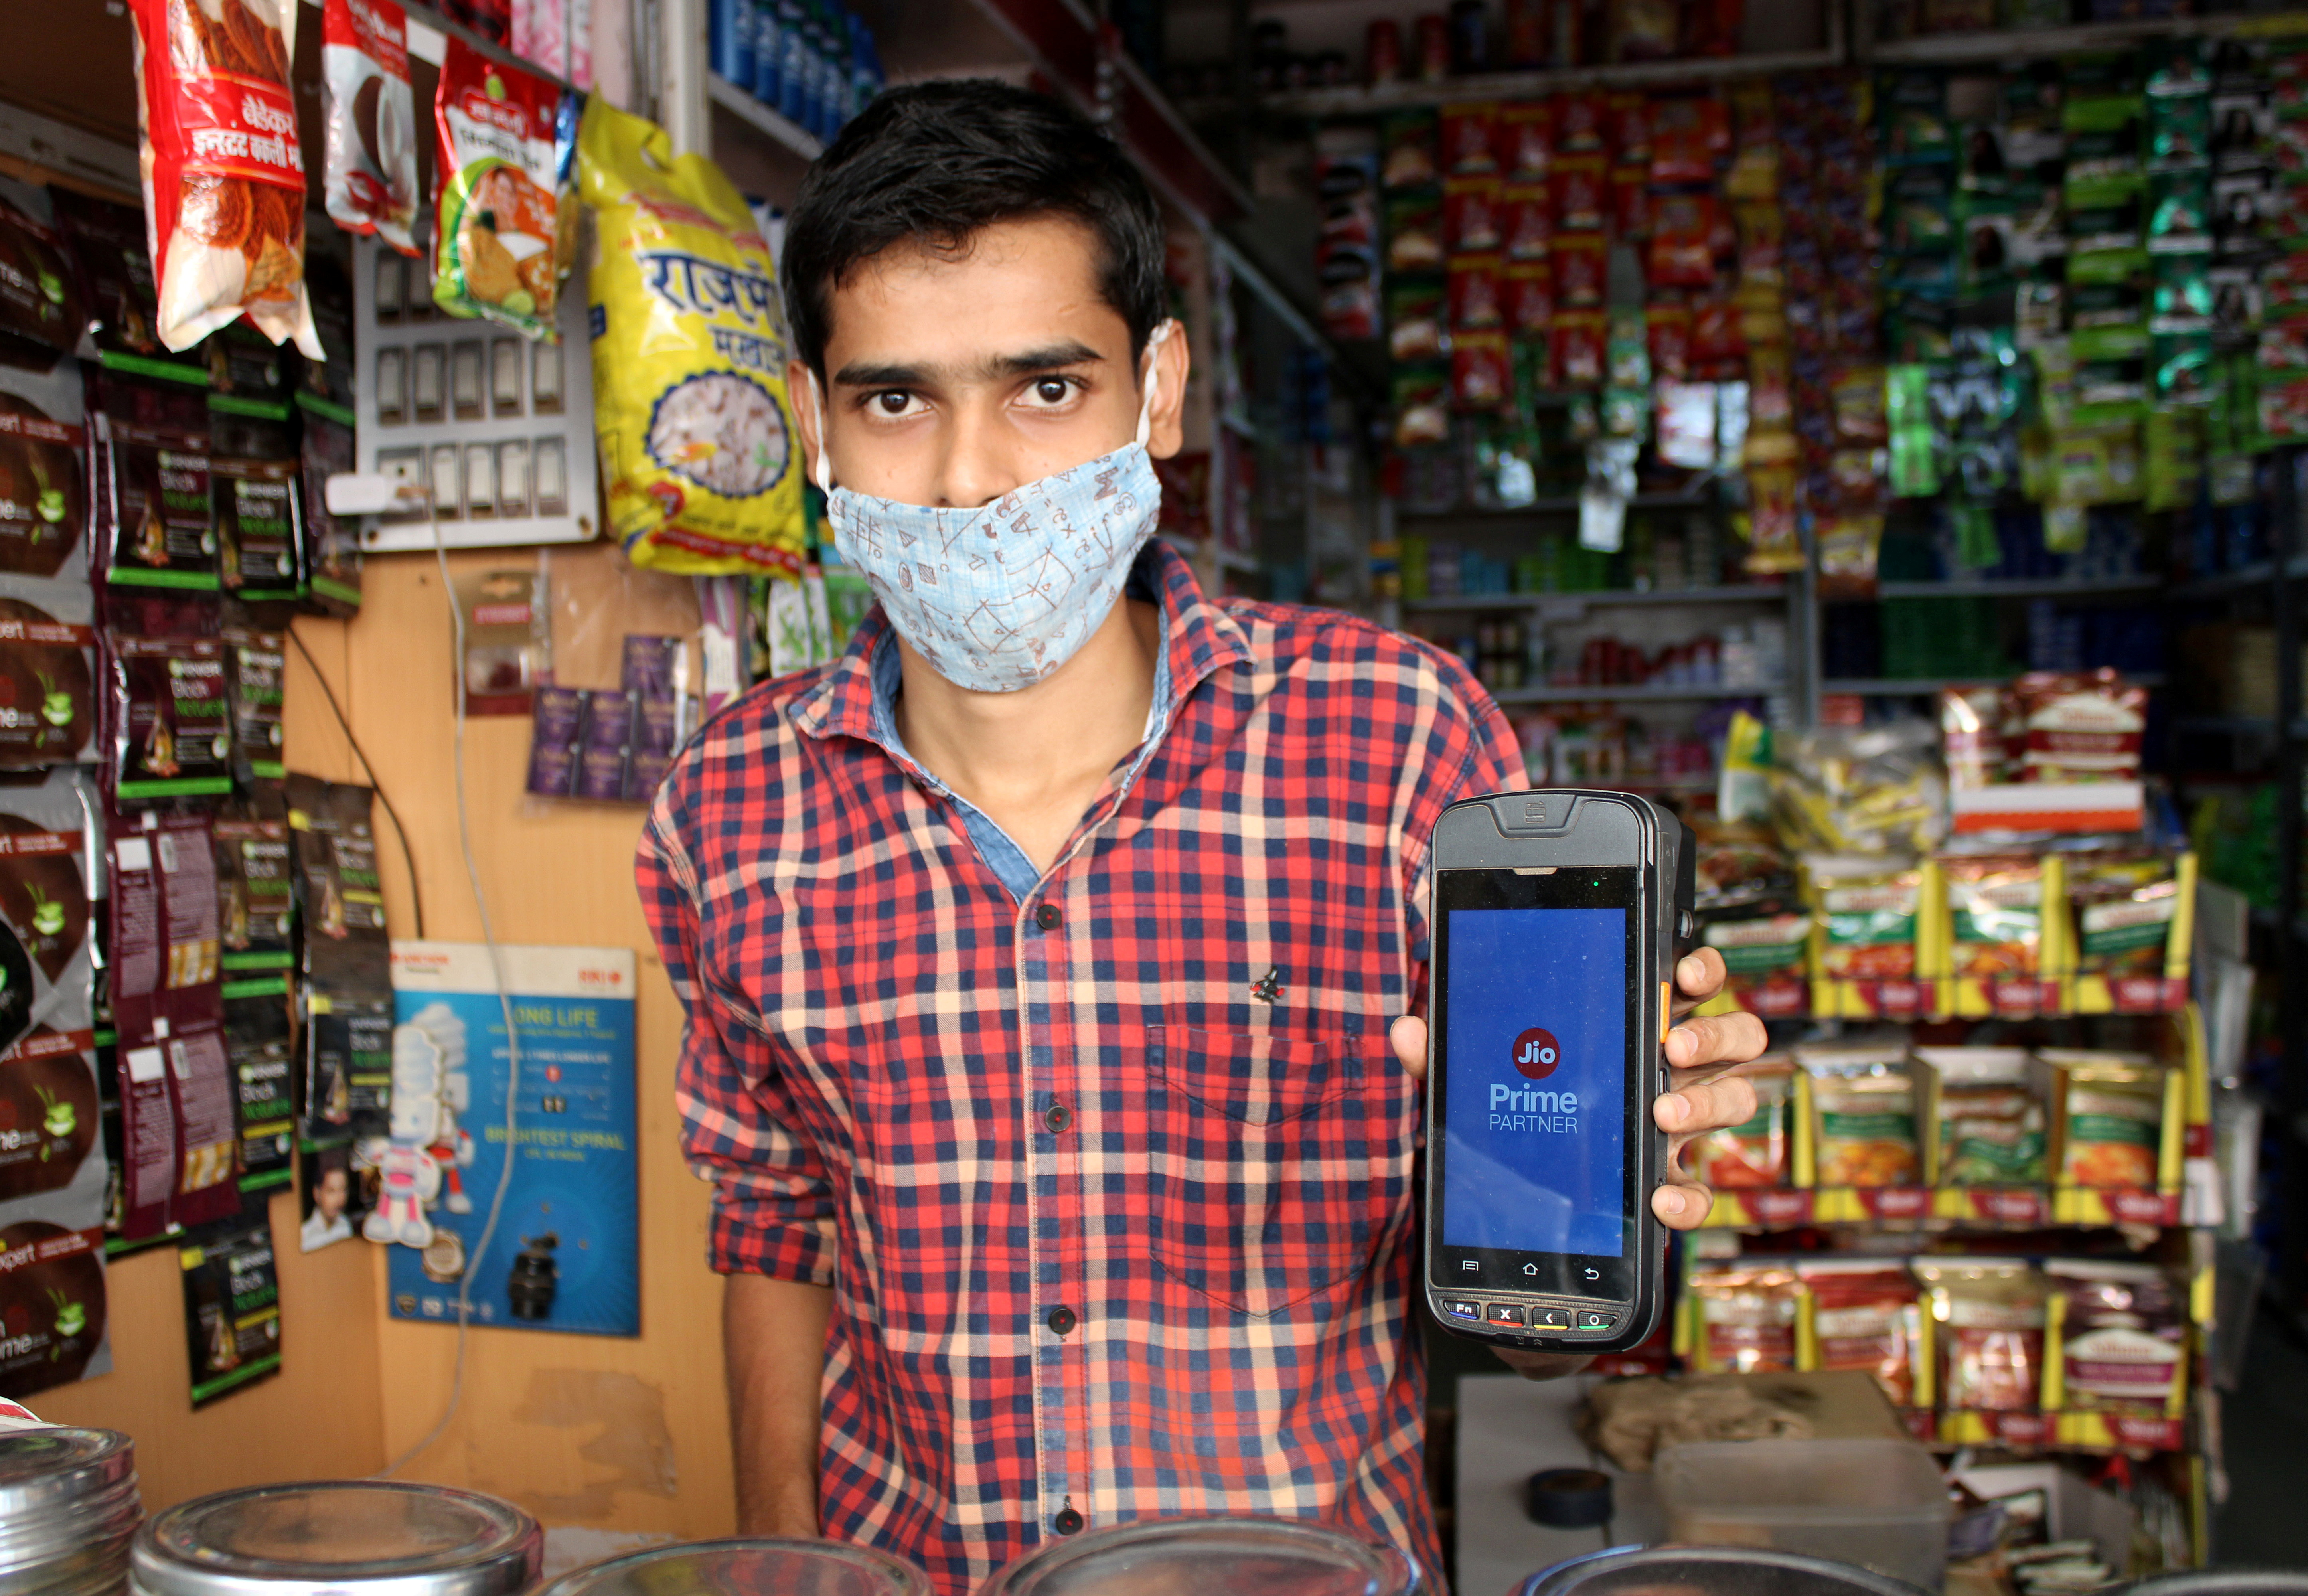 A shopkeeper selling consumer goods displays Reliance's JioMart point-of-sale machine that he uses to order supplies for his store in Sangli